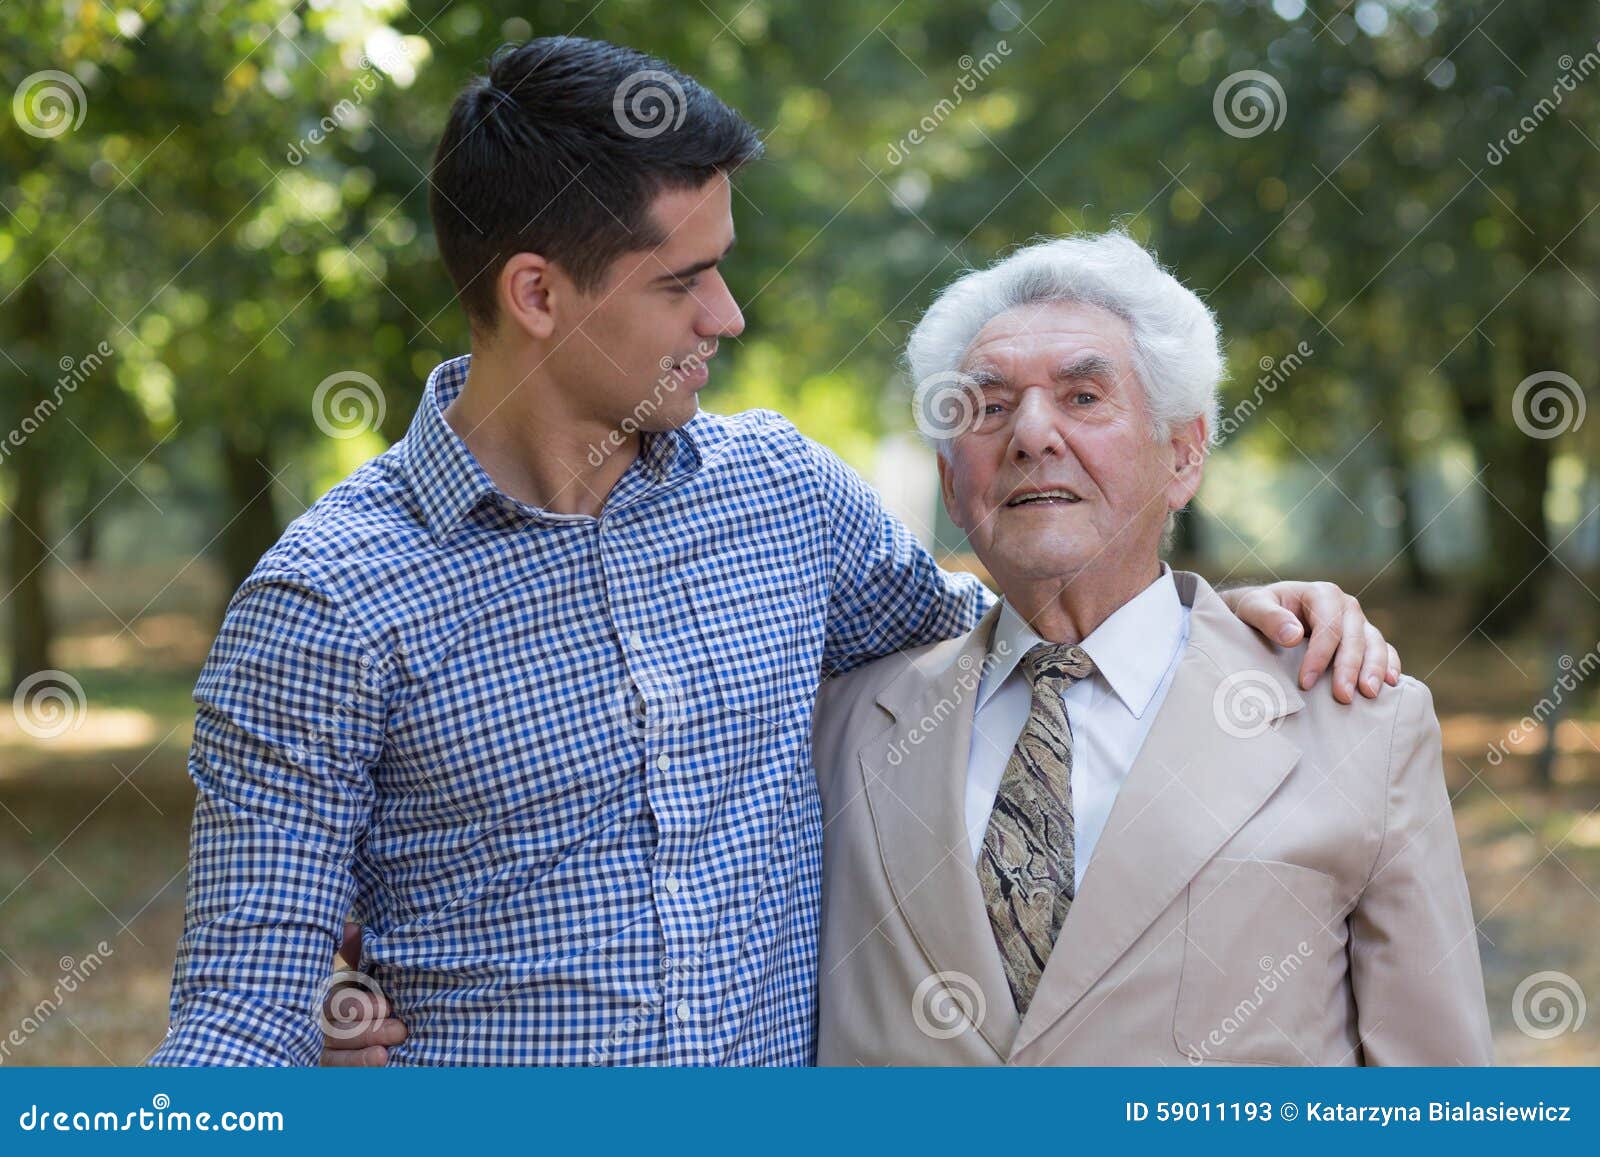 caring grandson and his grandfather